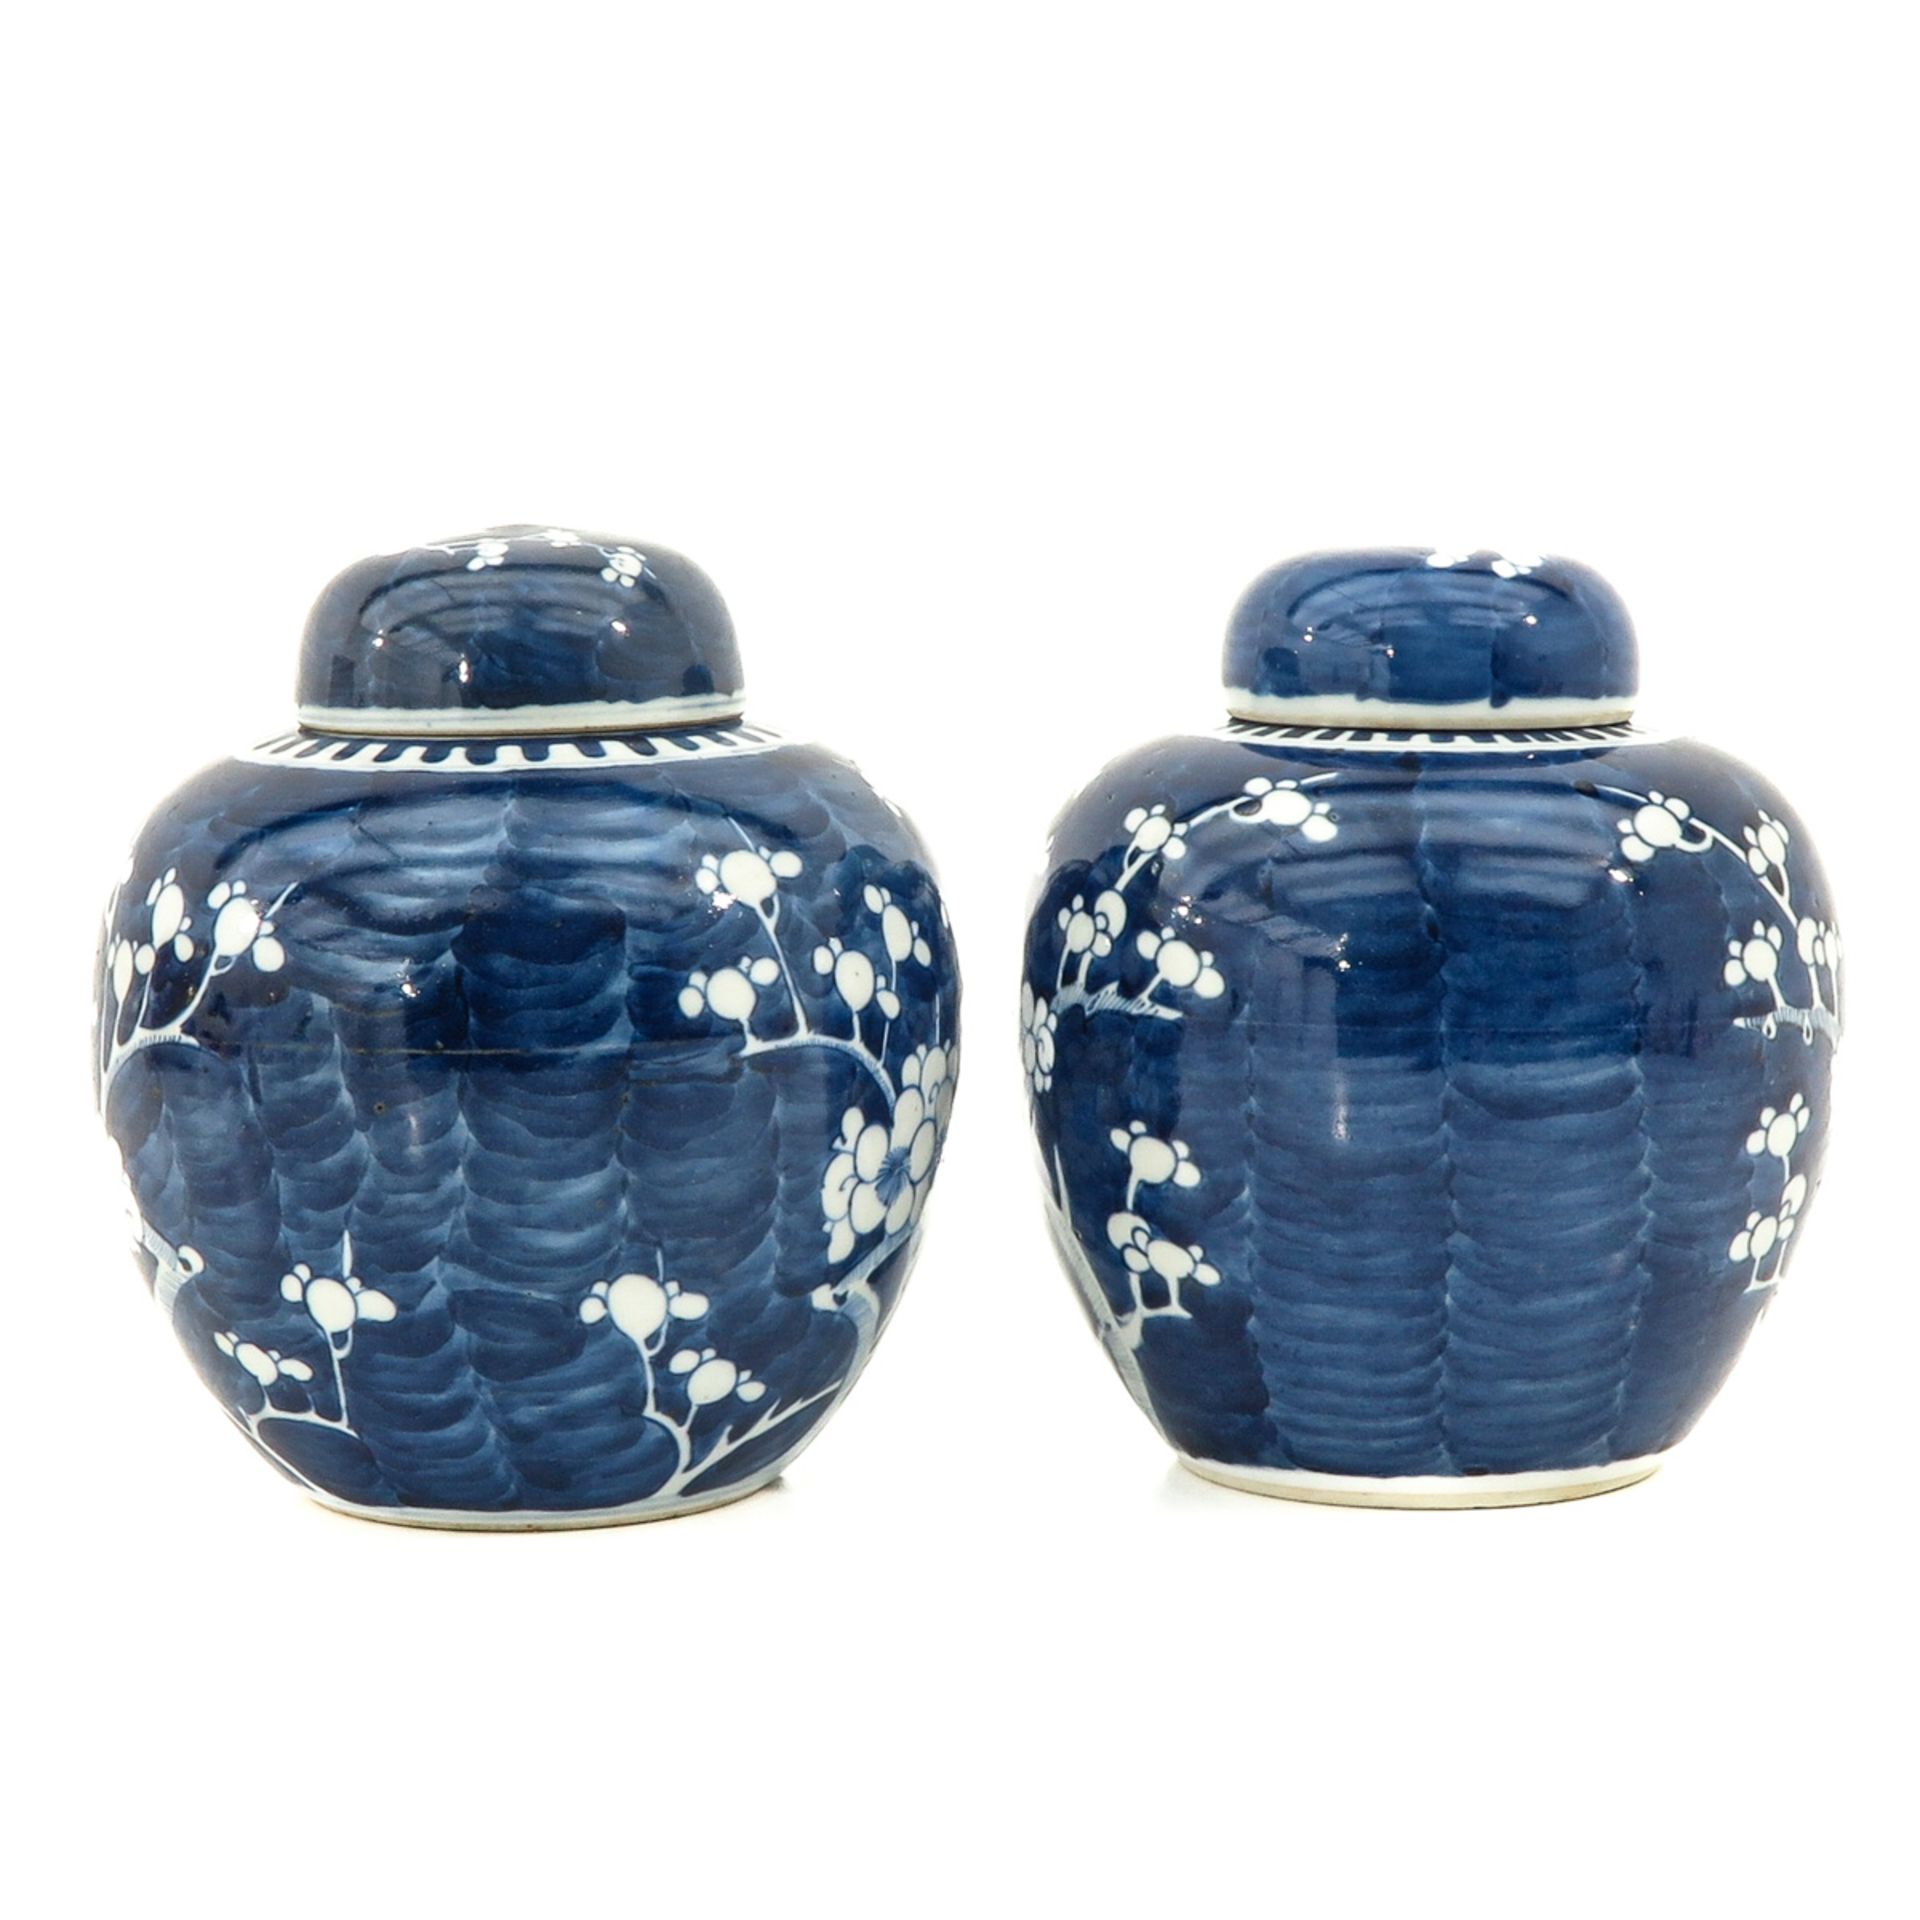 A Pair of Ginger Jars - Image 2 of 9